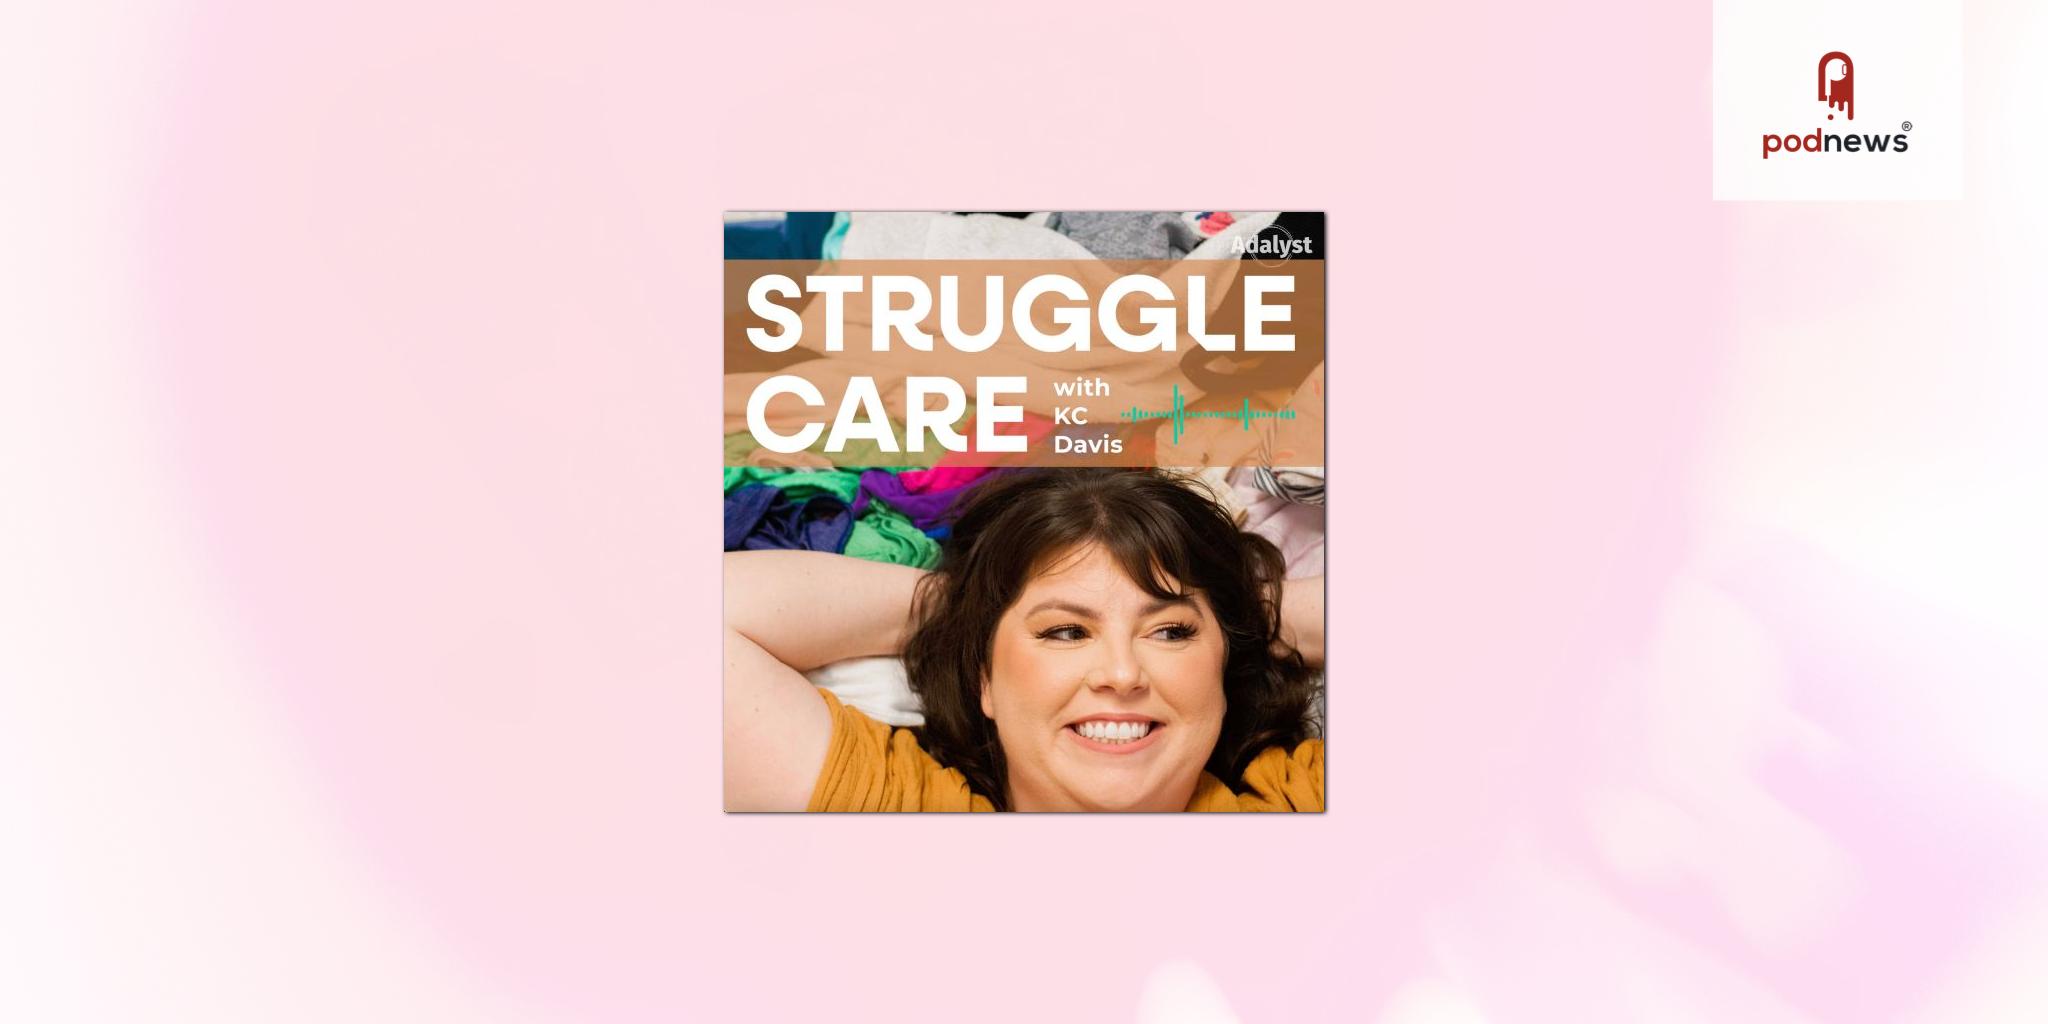 Adalyst Media Adds Struggle Care with KC Davis To Podcast Roster